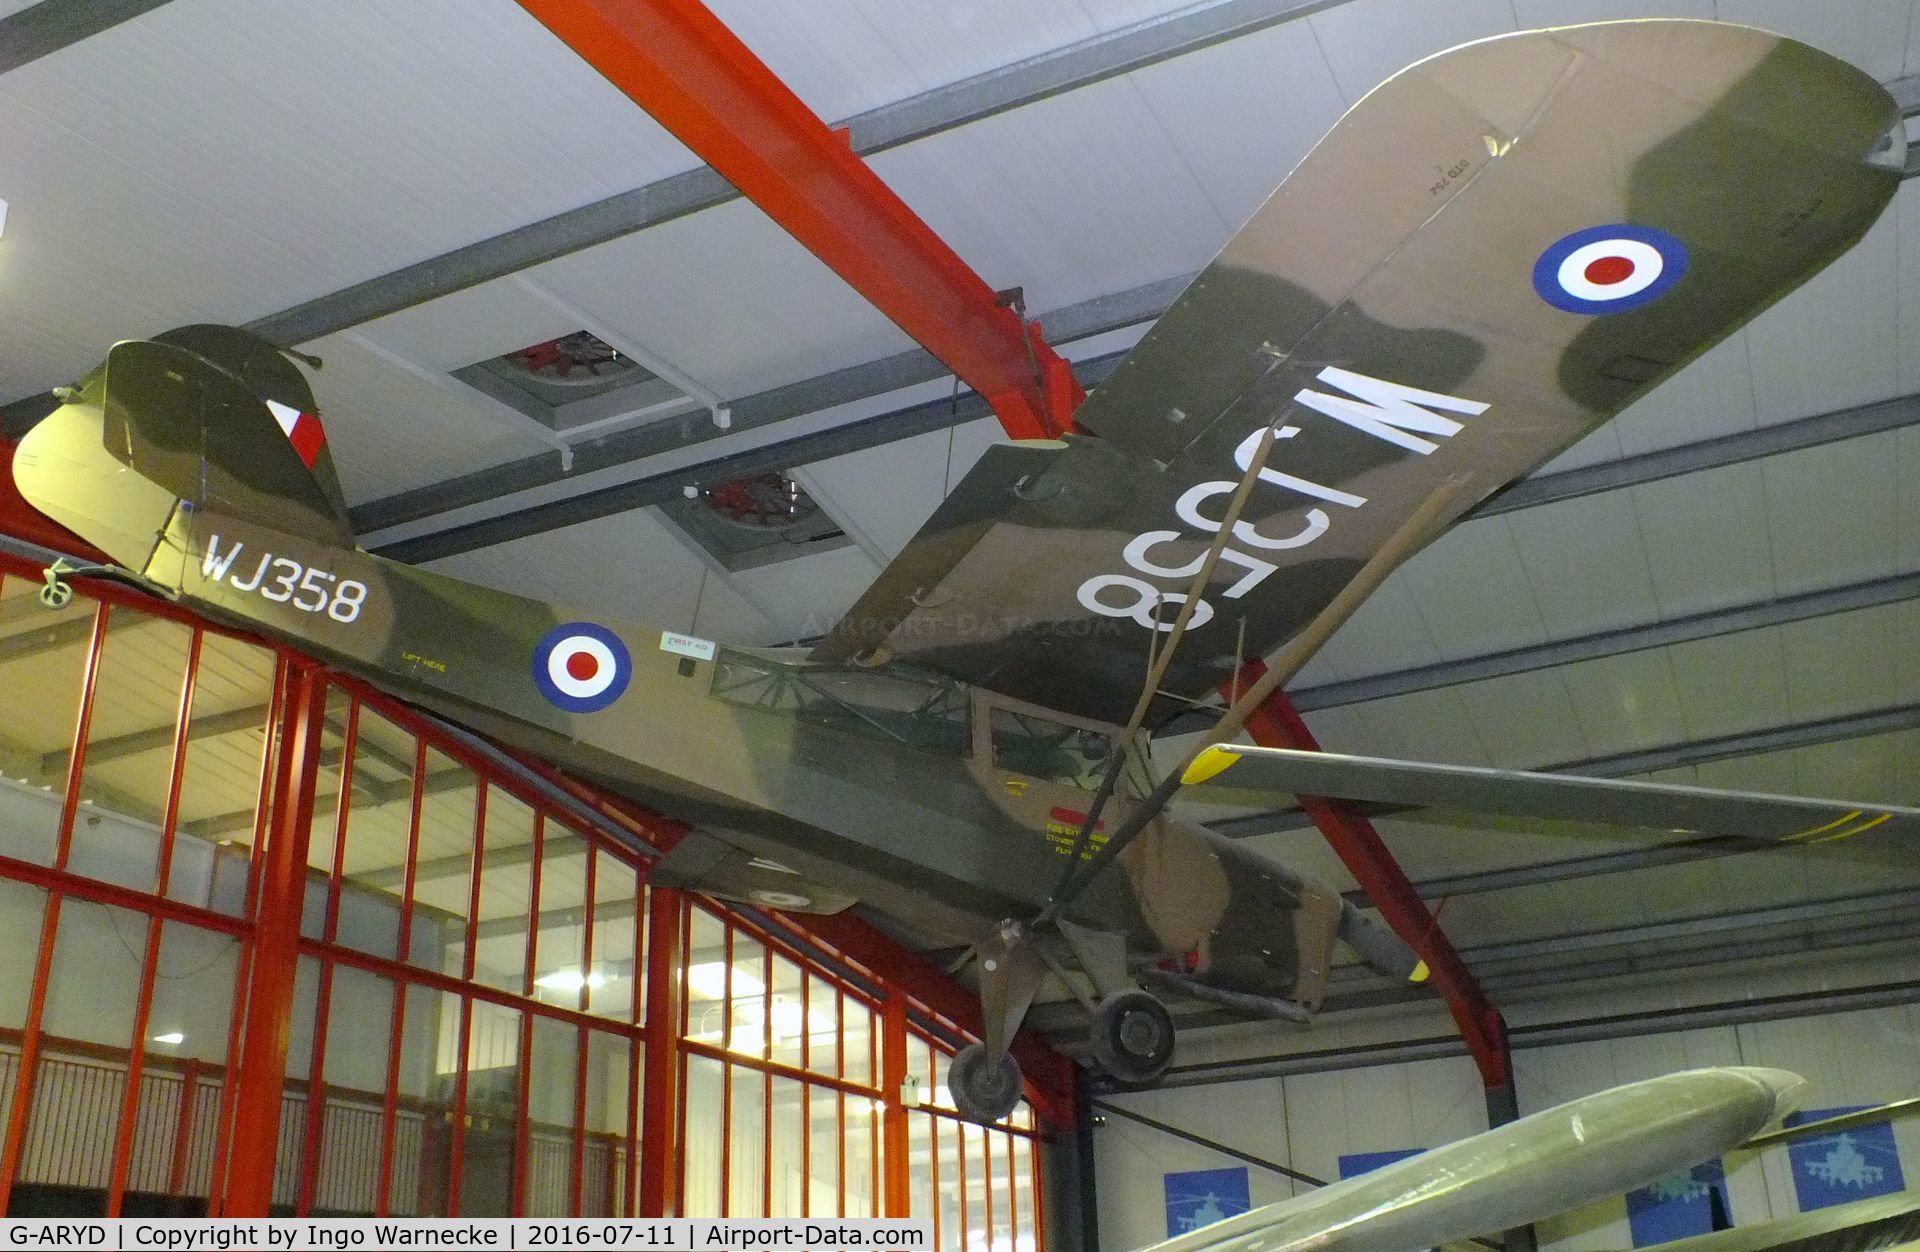 G-ARYD, 1952 Auster AOP.6 C/N Not found G-ARYD/WJ358, Auster AOP6 at the Museum of Army Flying, Middle Wallop